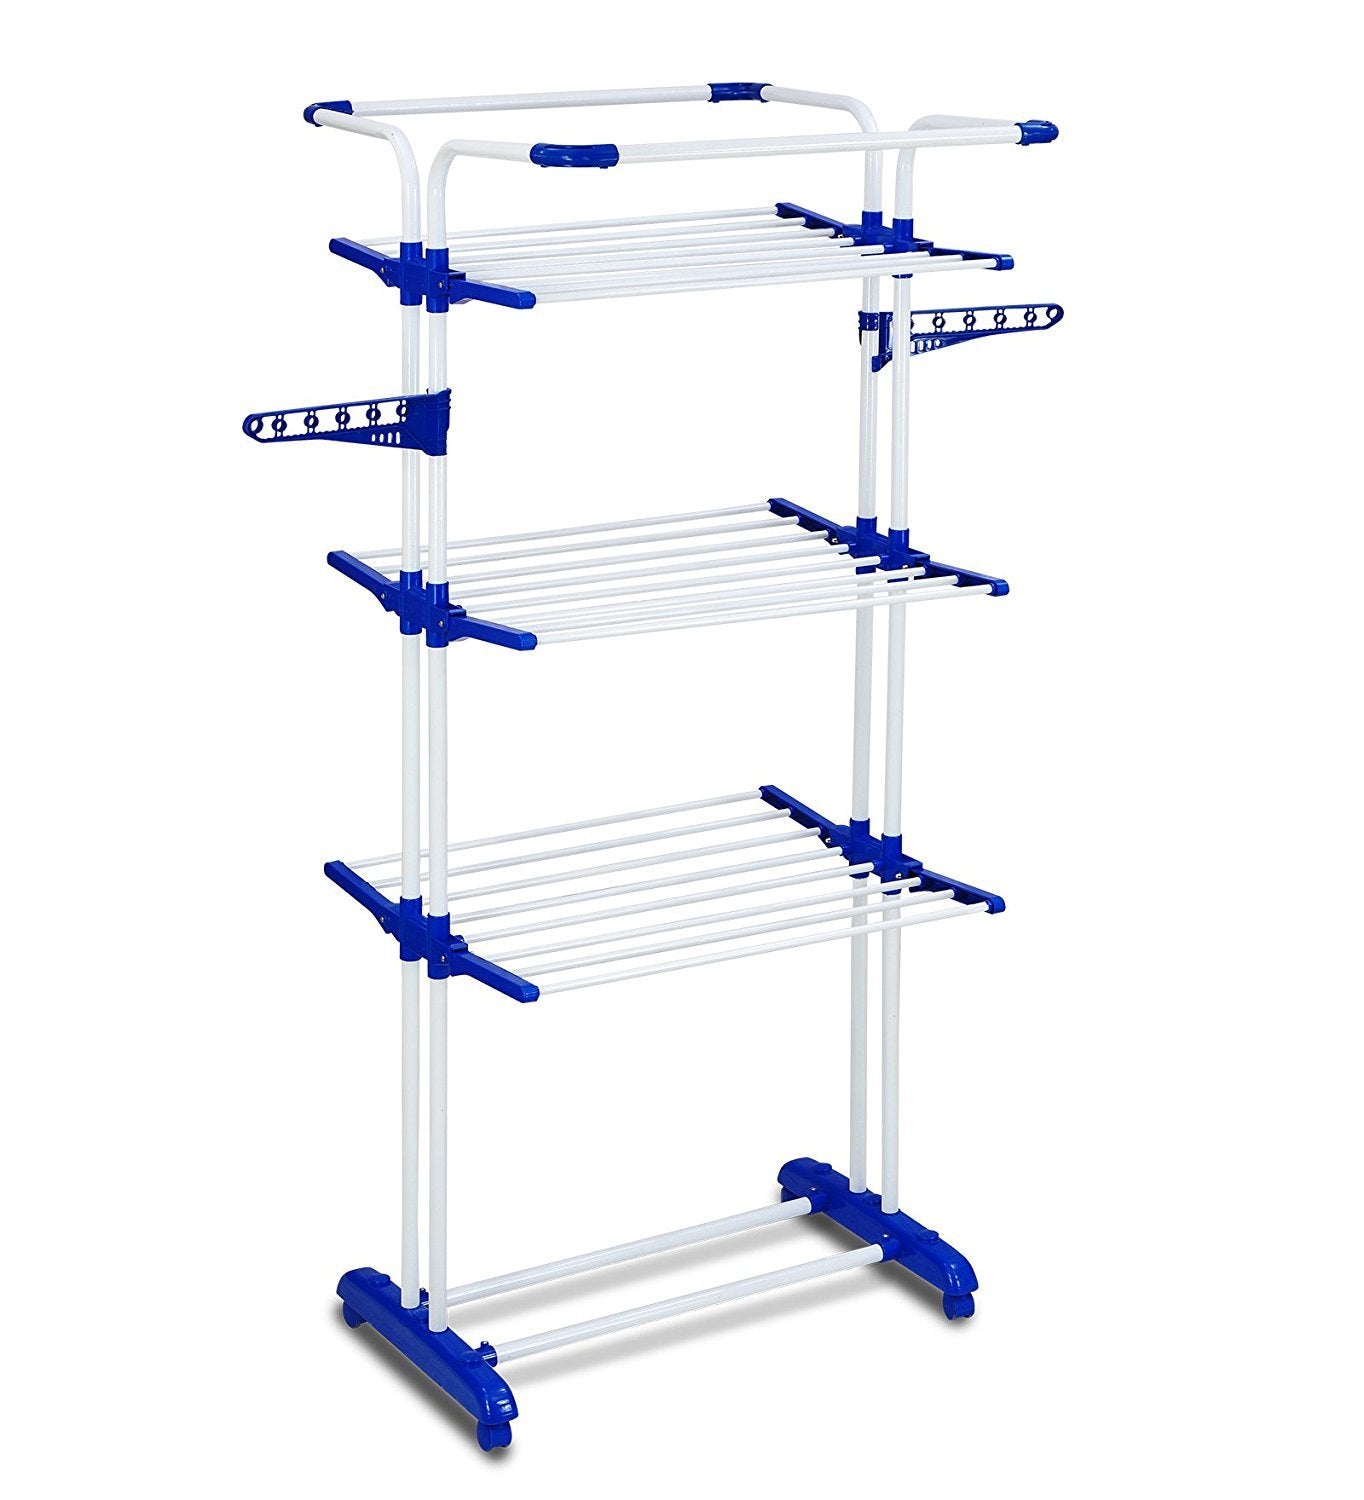 PoleMax Cloth Drying Stand | 3+1 Tier Big Foldable Powder Coated Mild Steel I Blue